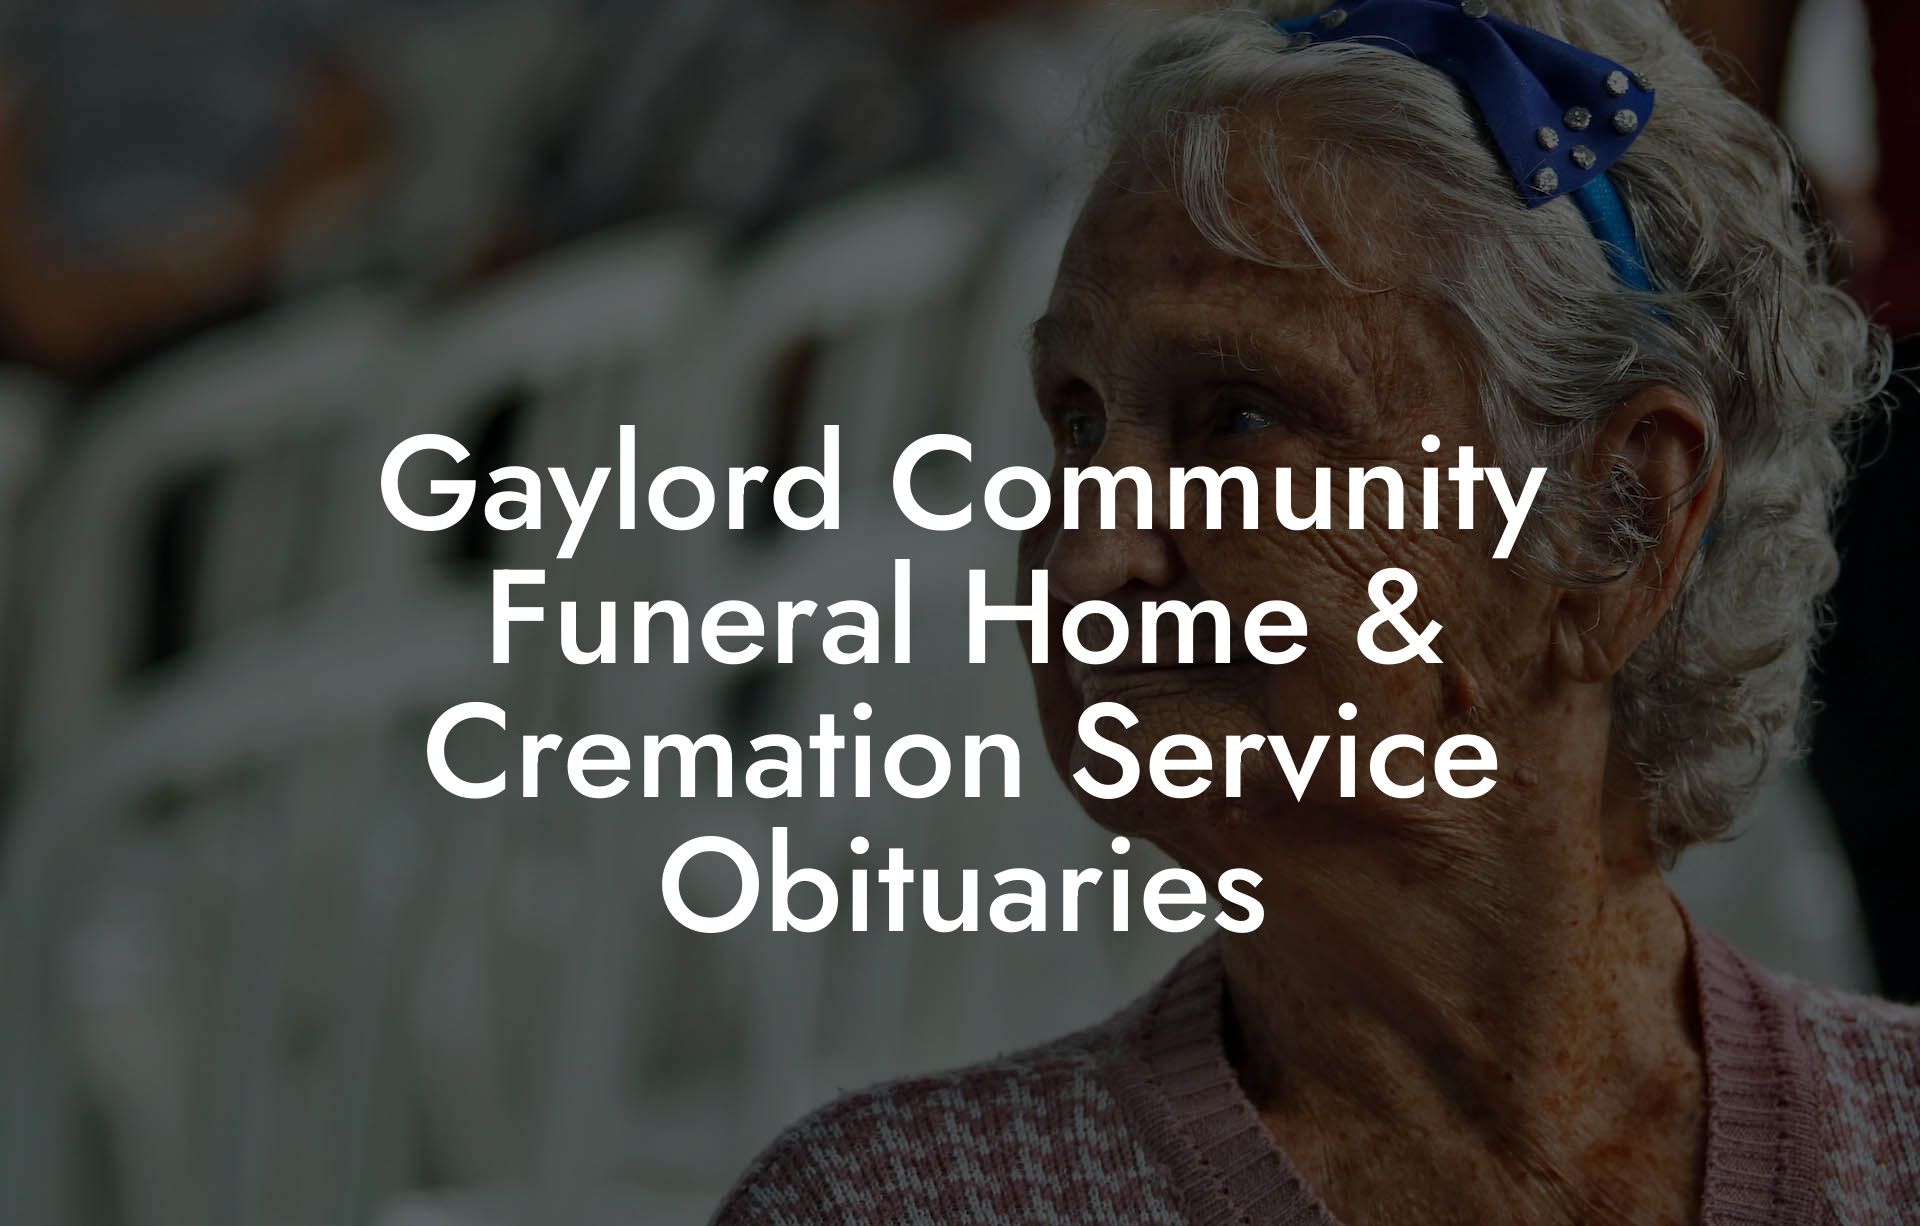 Gaylord Community Funeral Home & Cremation Service Obituaries